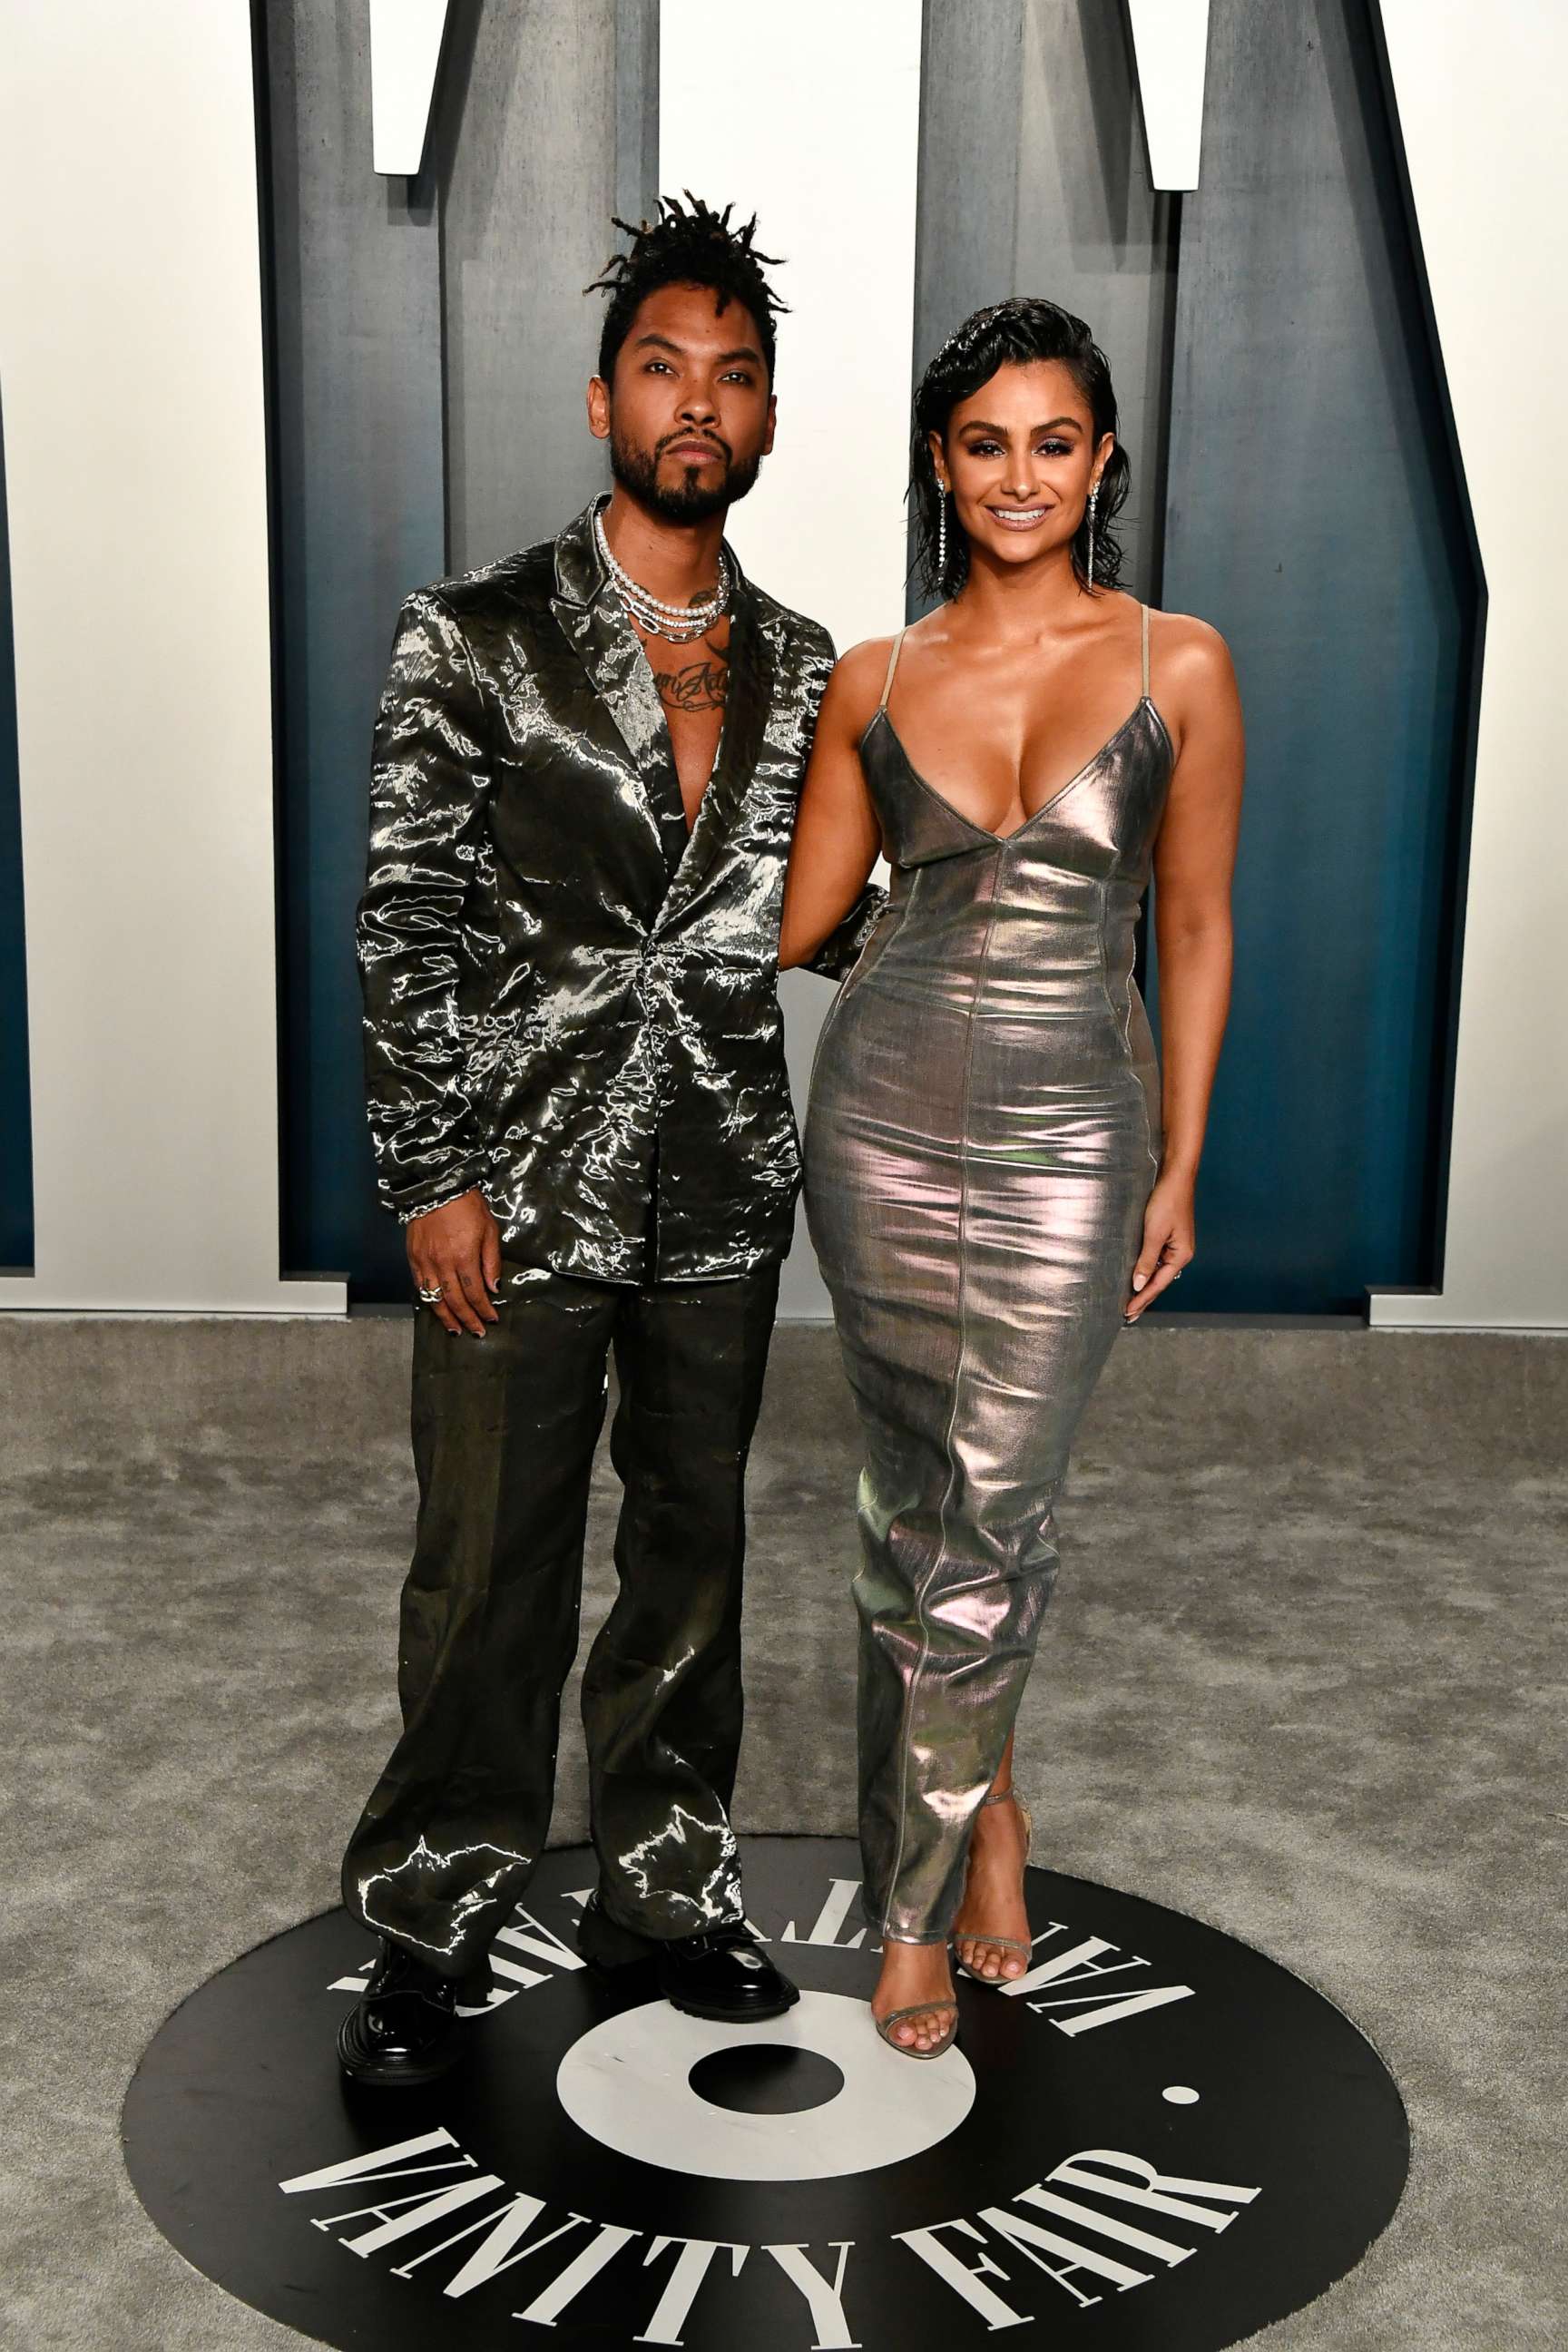 PHOTO: Miguel and Nazanin Mandi attend the 2020 Vanity Fair Oscar Party at Wallis Annenberg Center for the Performing Arts on Feb. 9, 2020 in Beverly Hills, Calif.